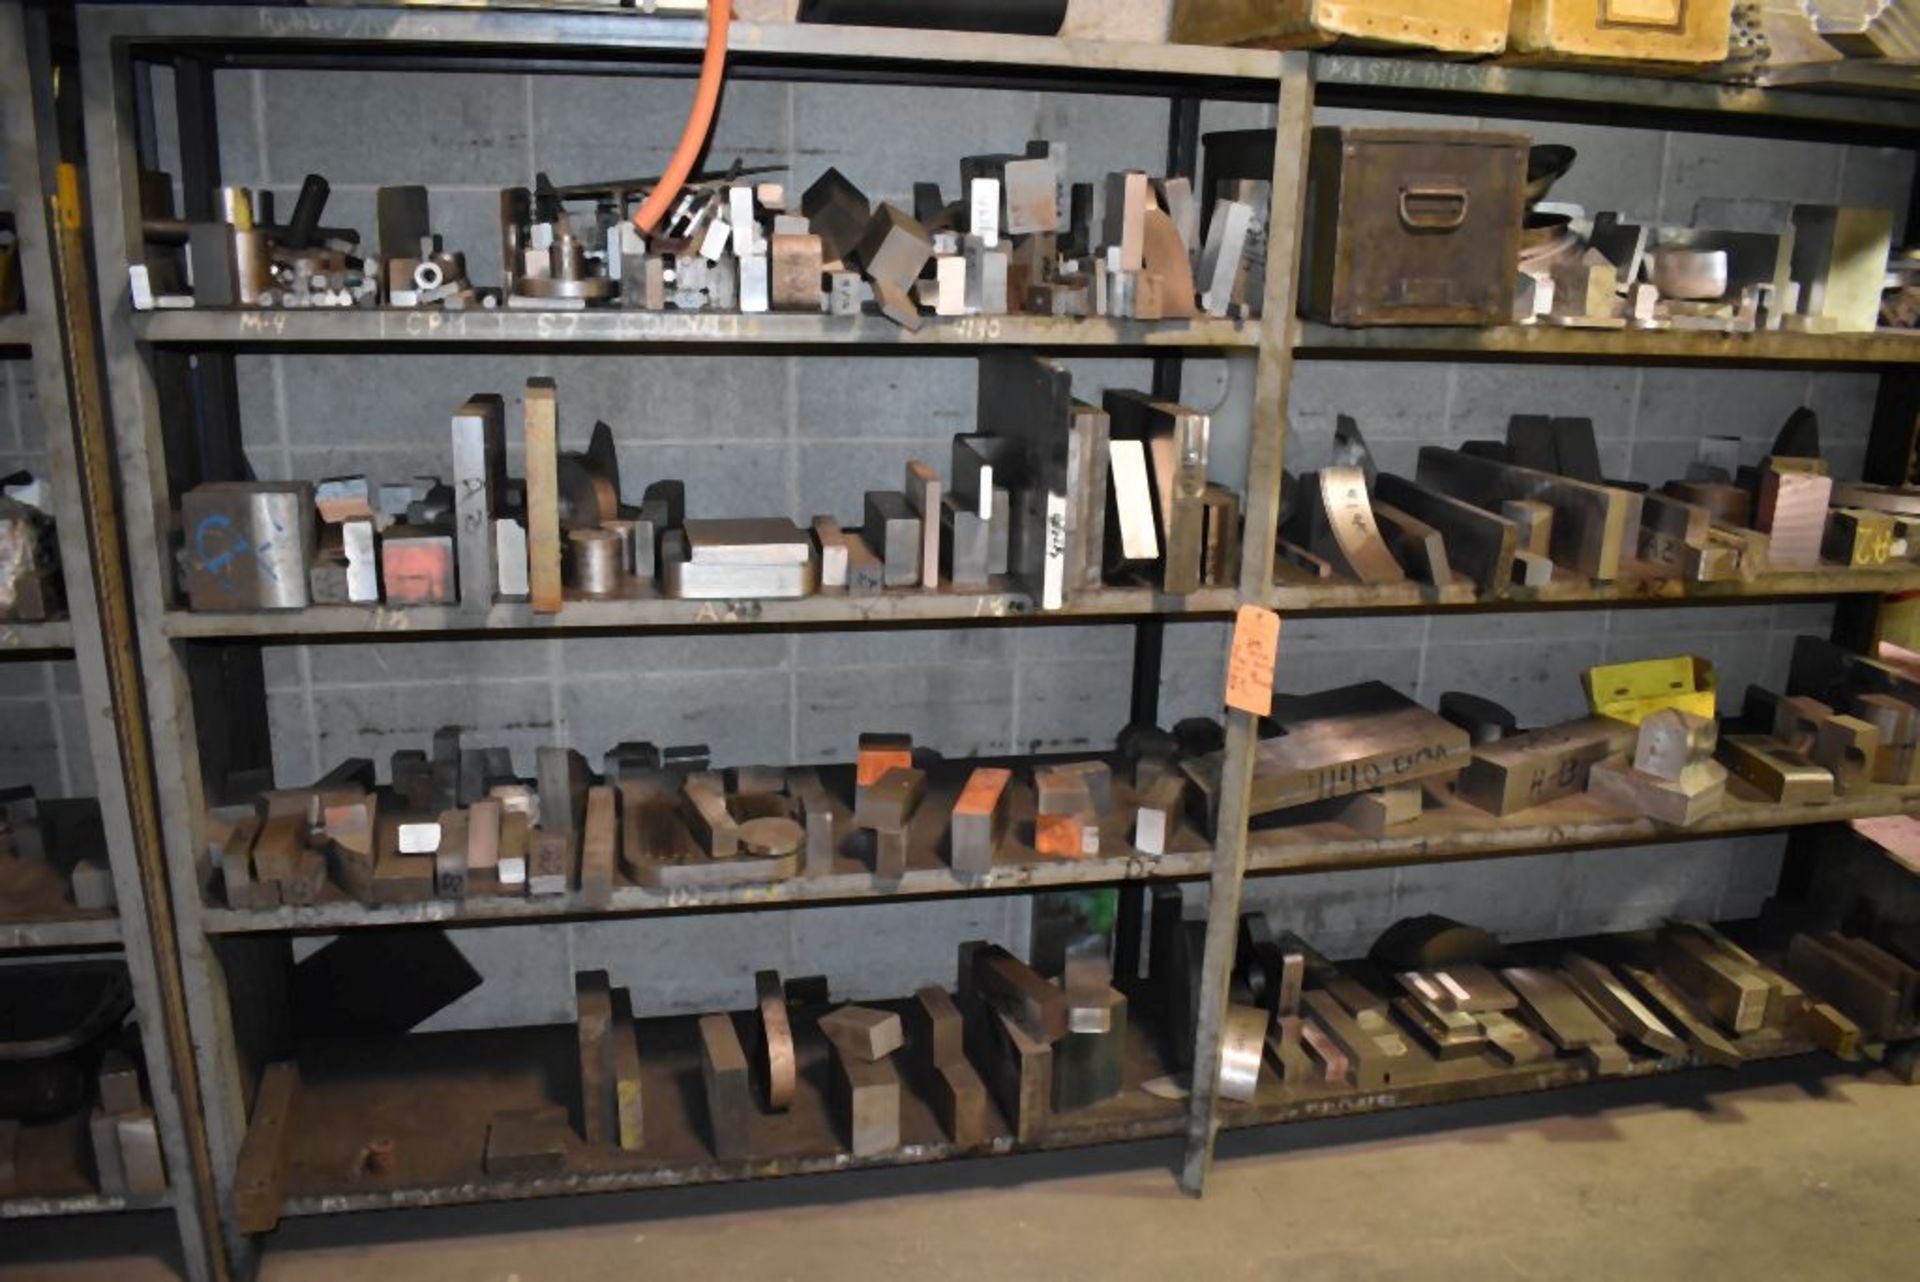 HEAVY DUTY STEEL SHELVING UNIT WITH CONTENTS, 10'2"L x 18"D x 66"H - Image 3 of 3